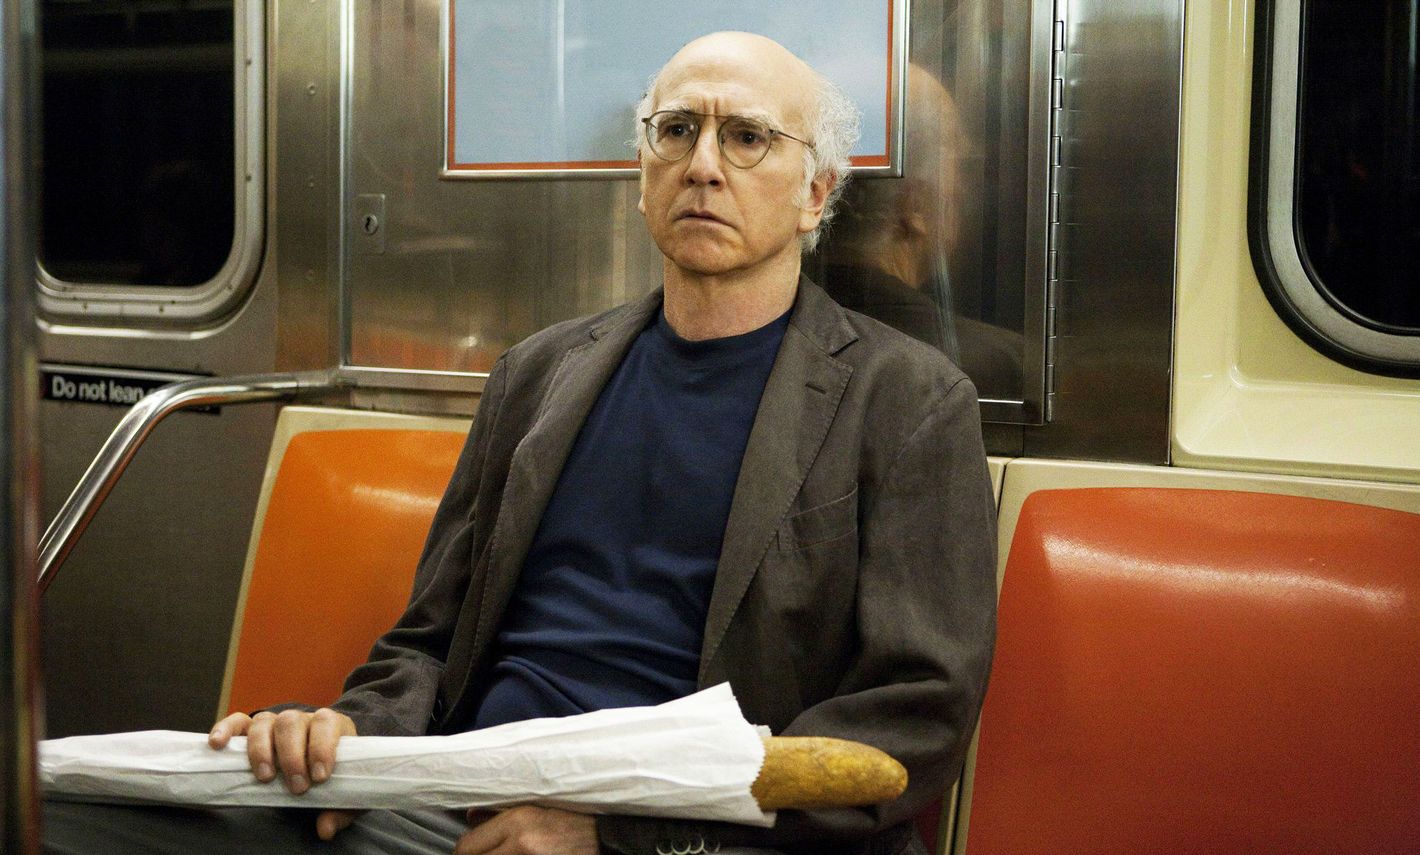 49 Facts About Larry David - Facts.net